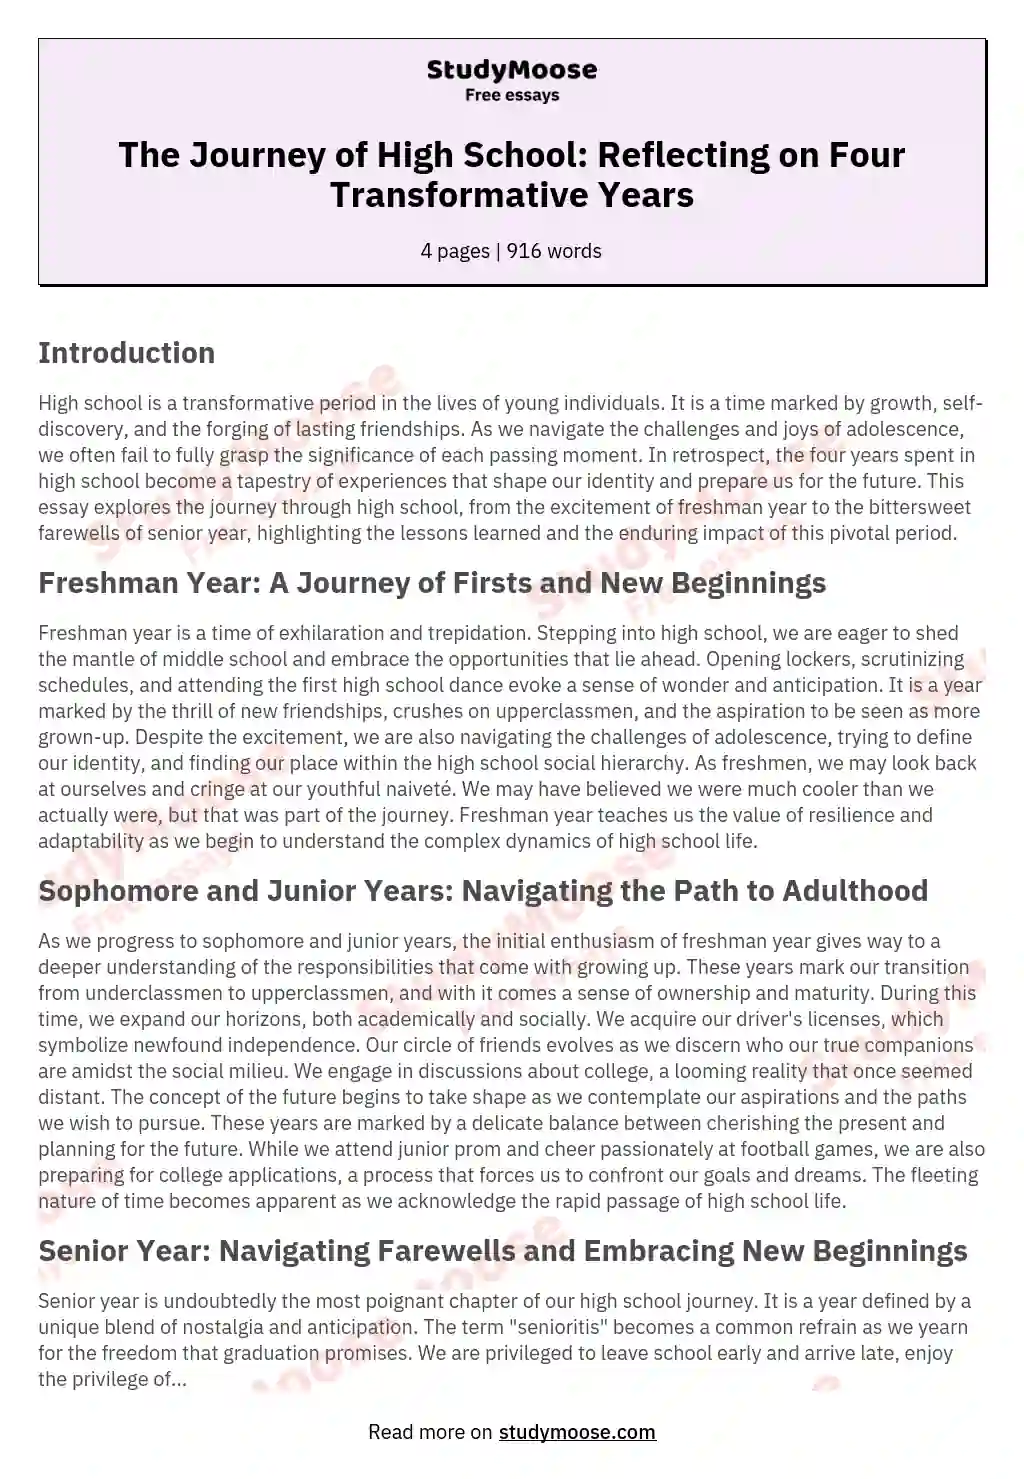 The Journey of High School: Reflecting on Four Transformative Years essay